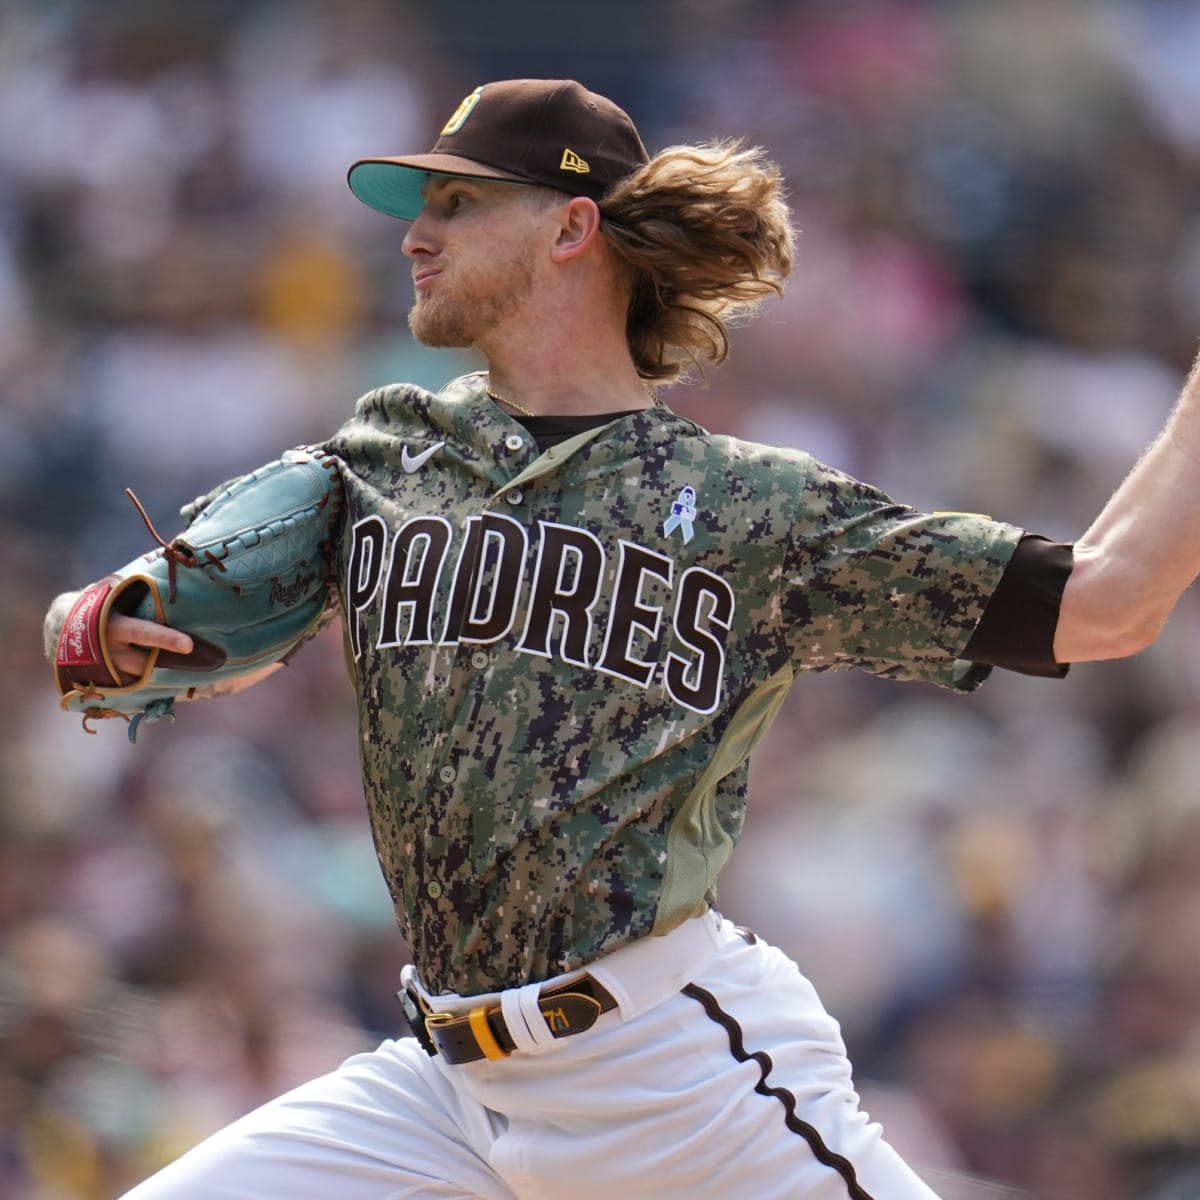 REPORT: Blake Snell AND Josh Hader WILL BE TRADED (Padres News